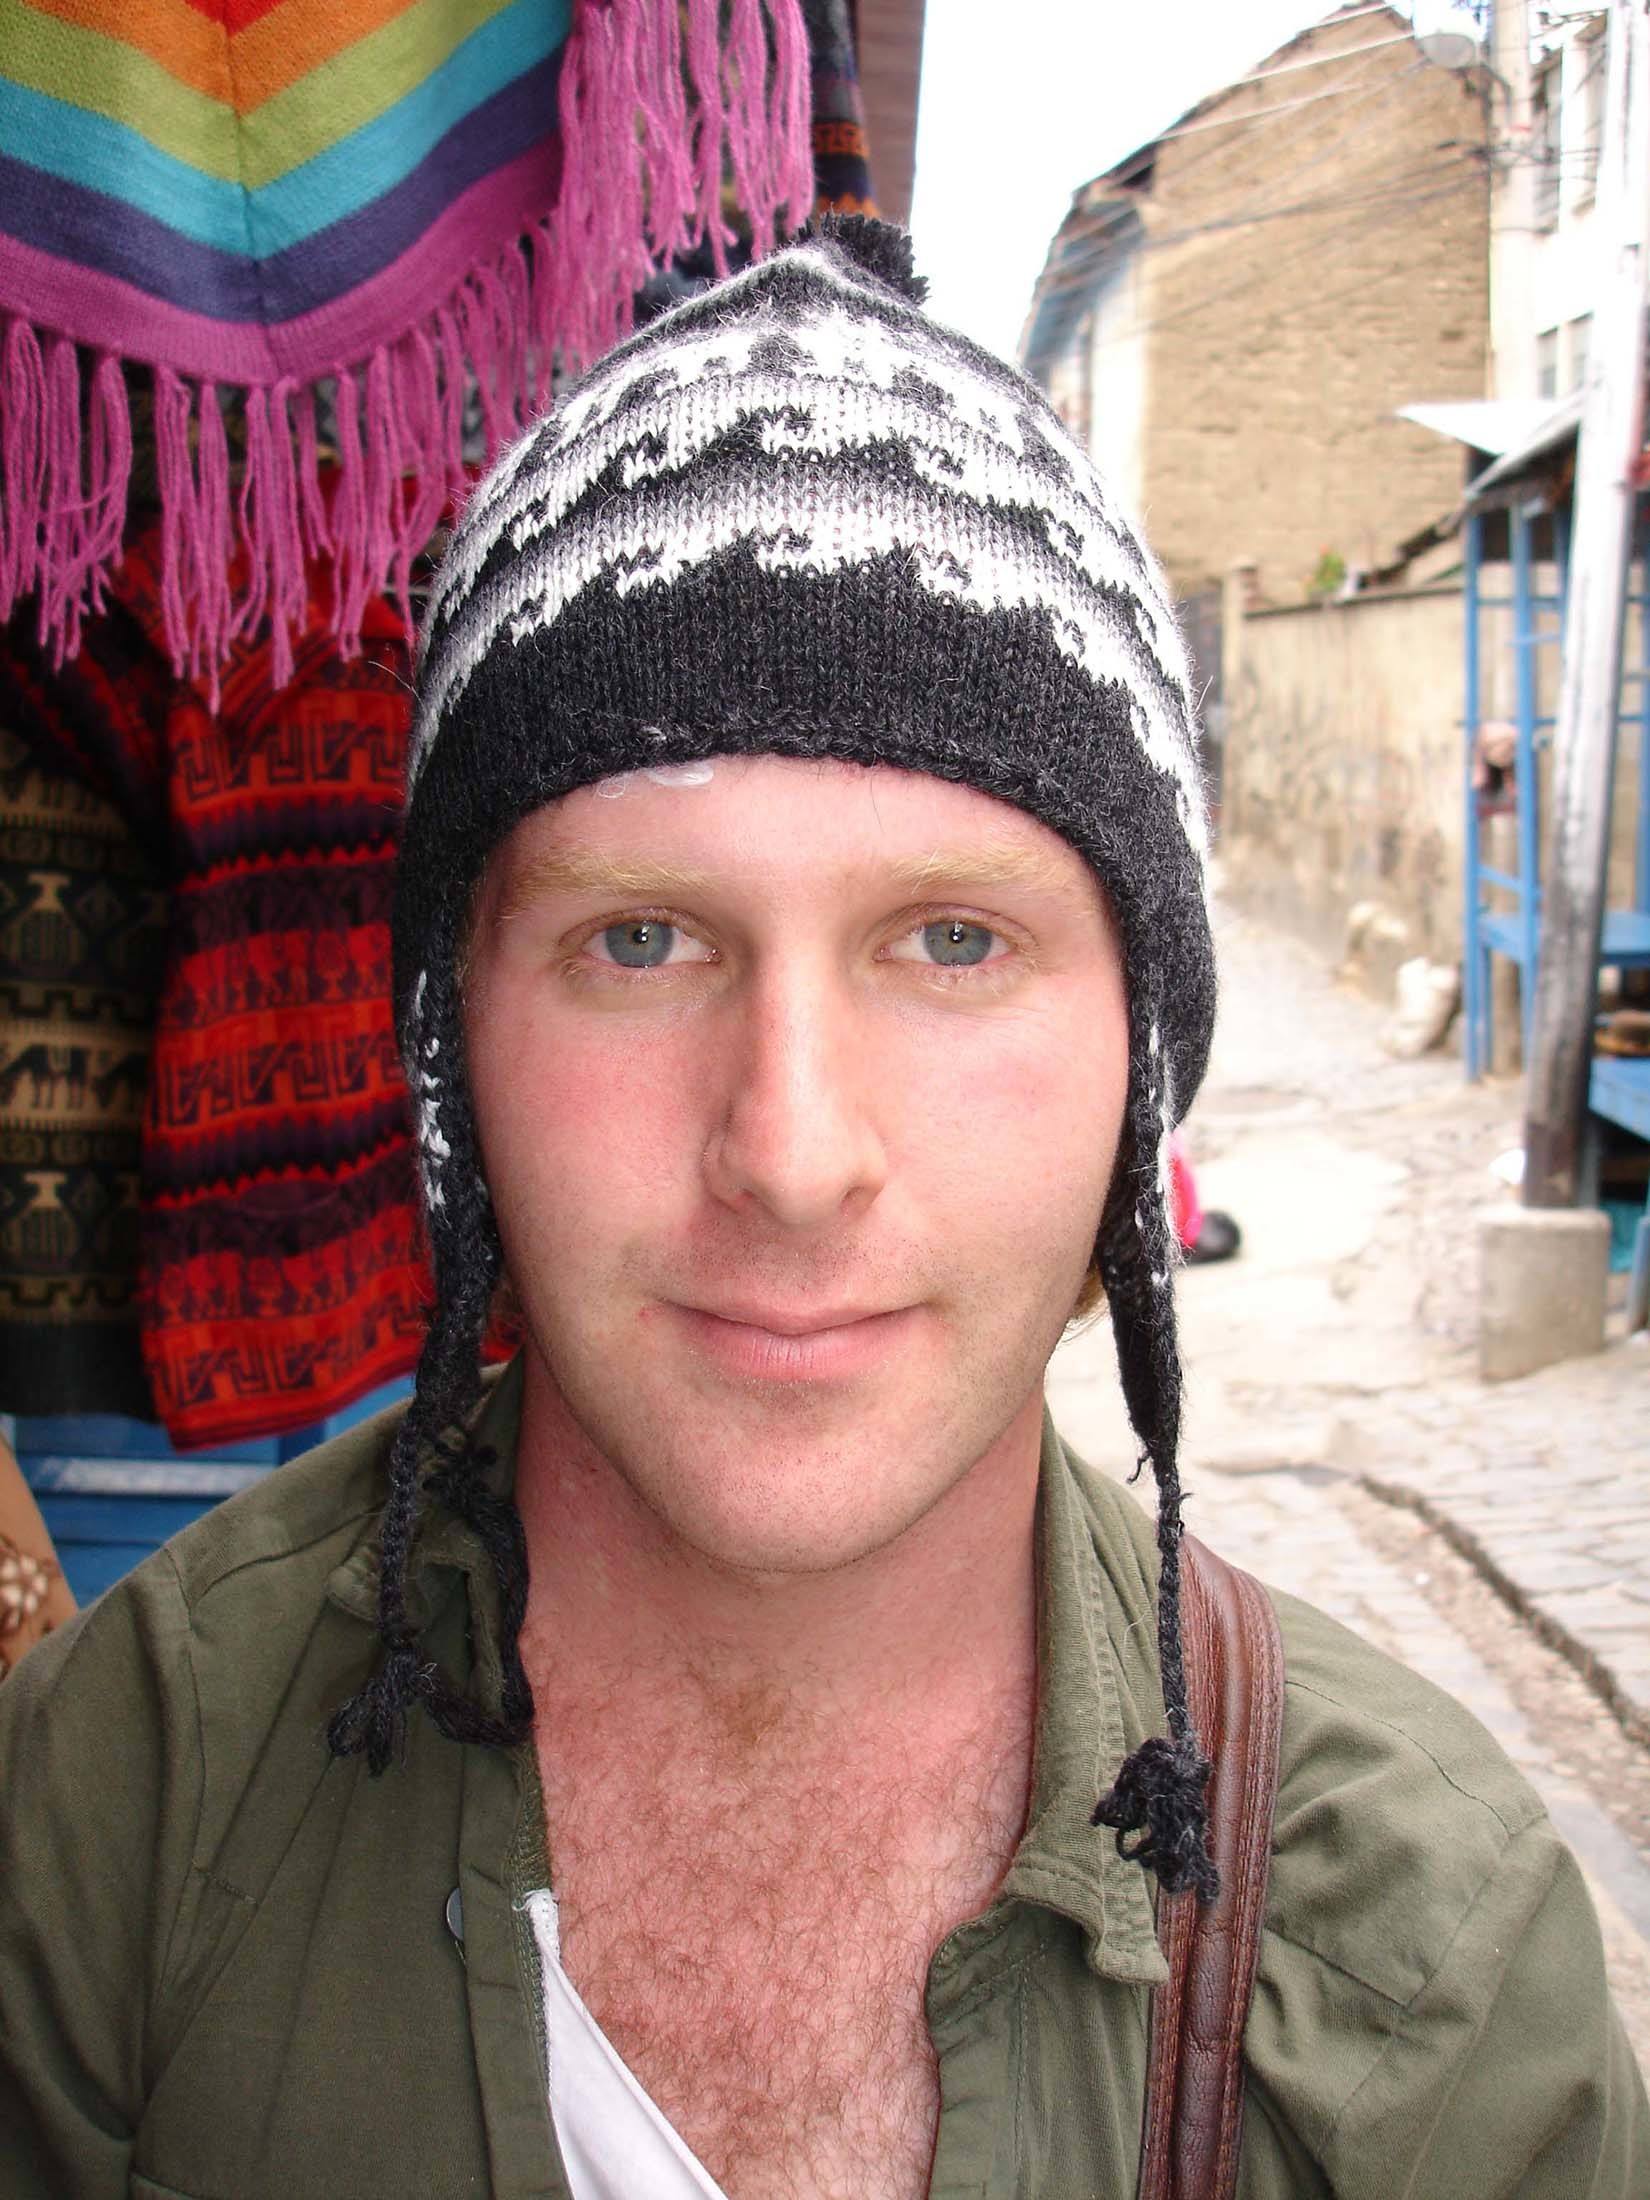 Ben wearing beanie in the streets of La Paz Bolivia